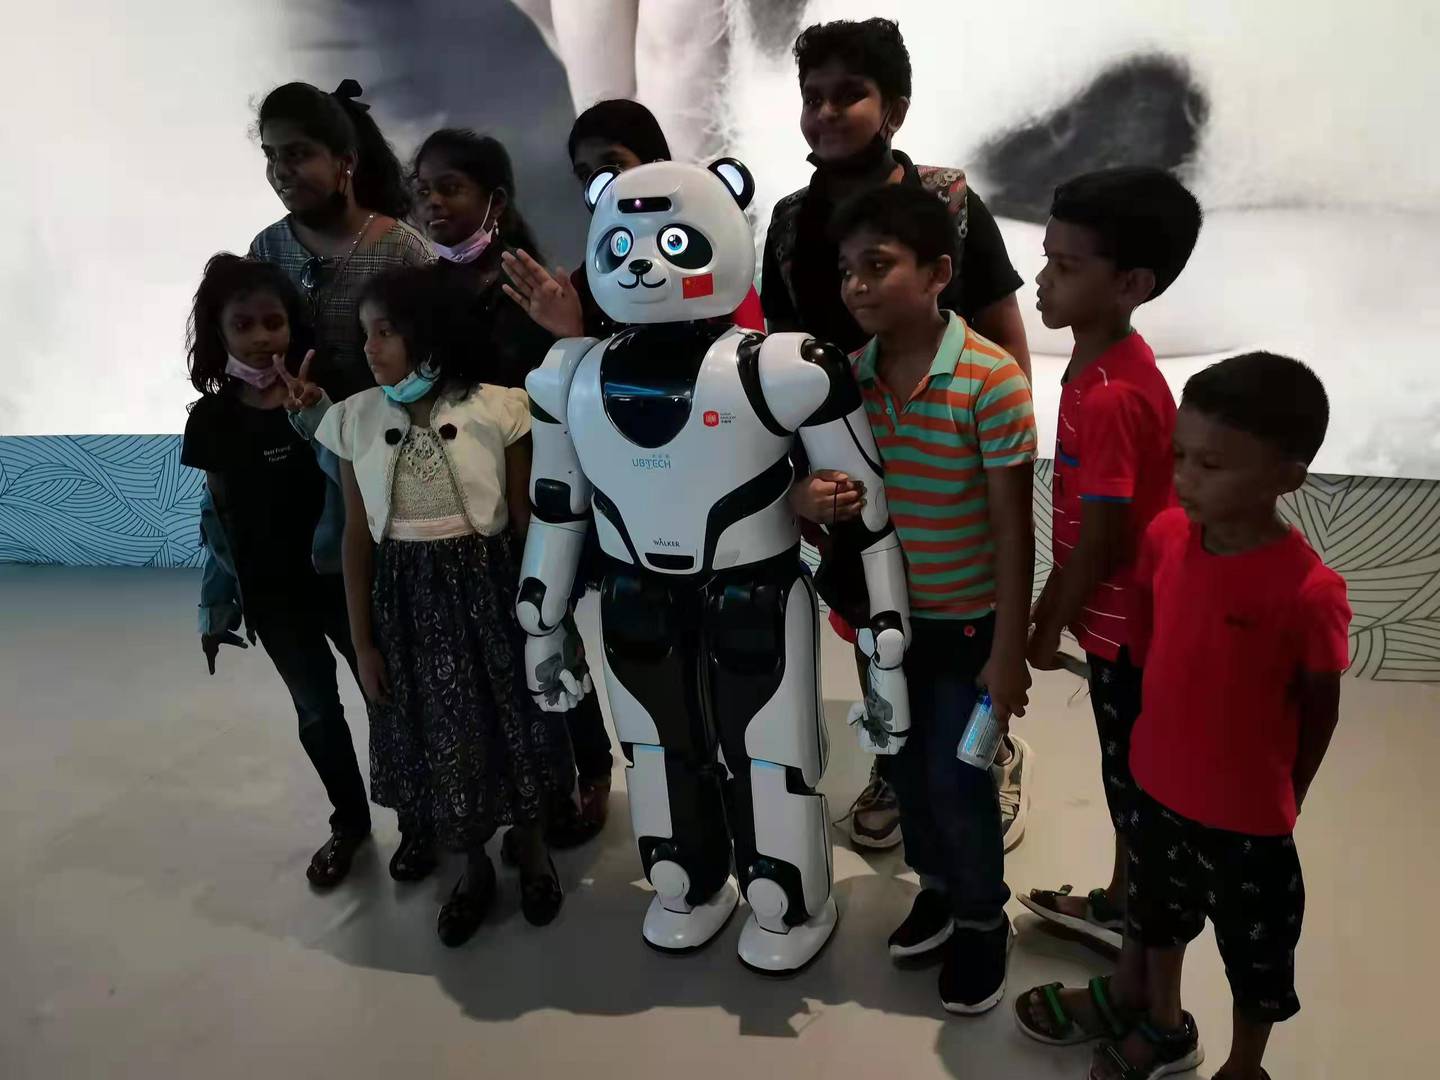 A panda robot called Youyou is a big hit with visitors to the China pavilion at Expo 2020 Dubai. Photo: China pavilion